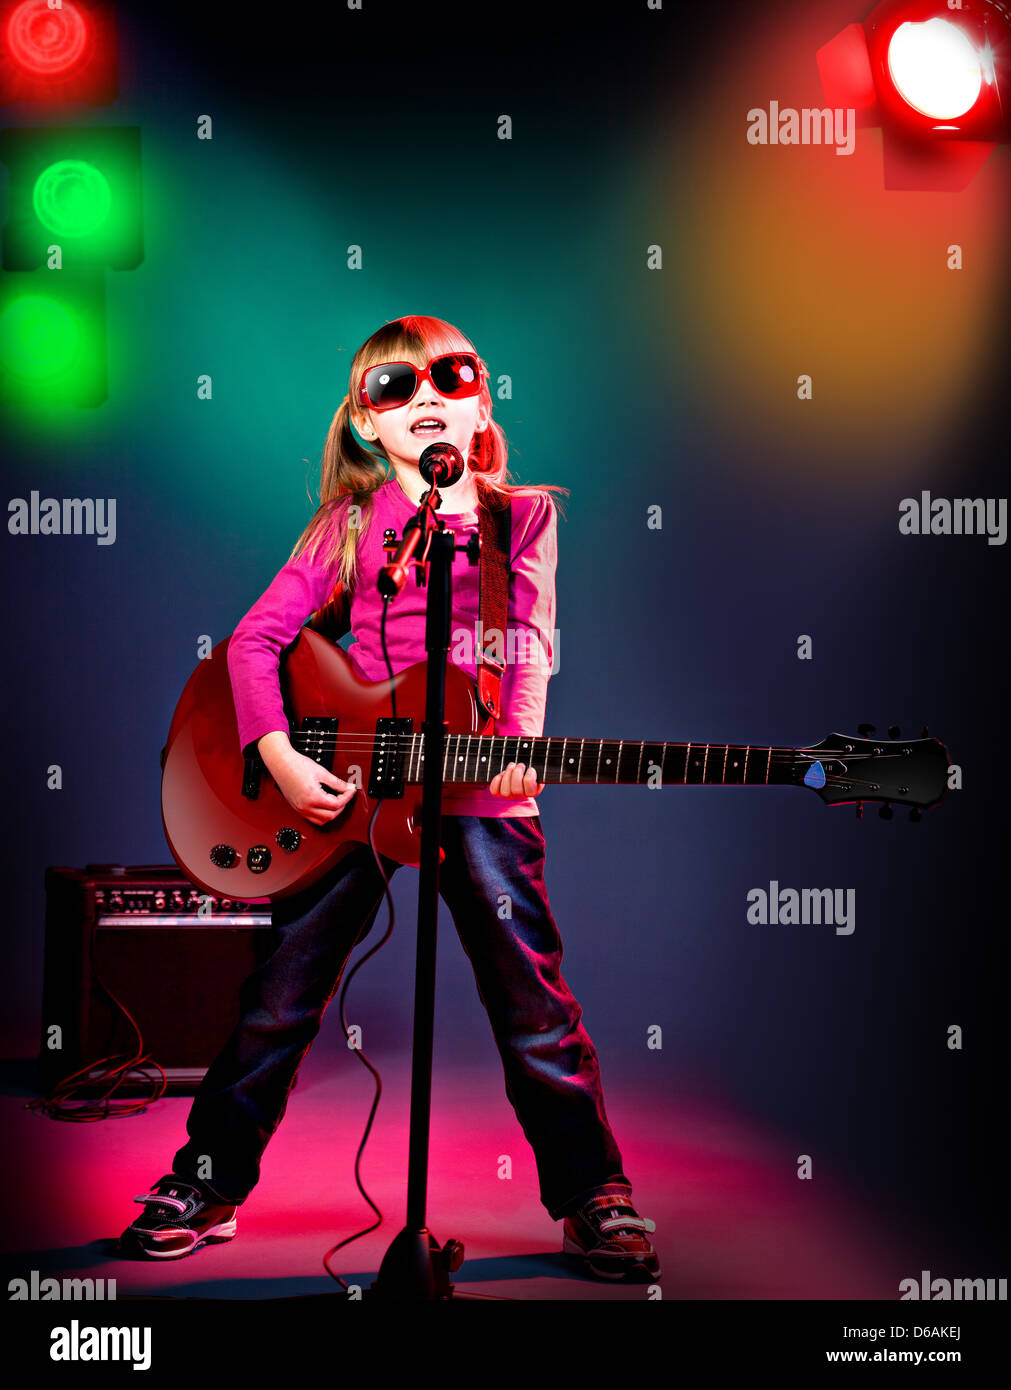 Rock and Roll girl Stock Photo